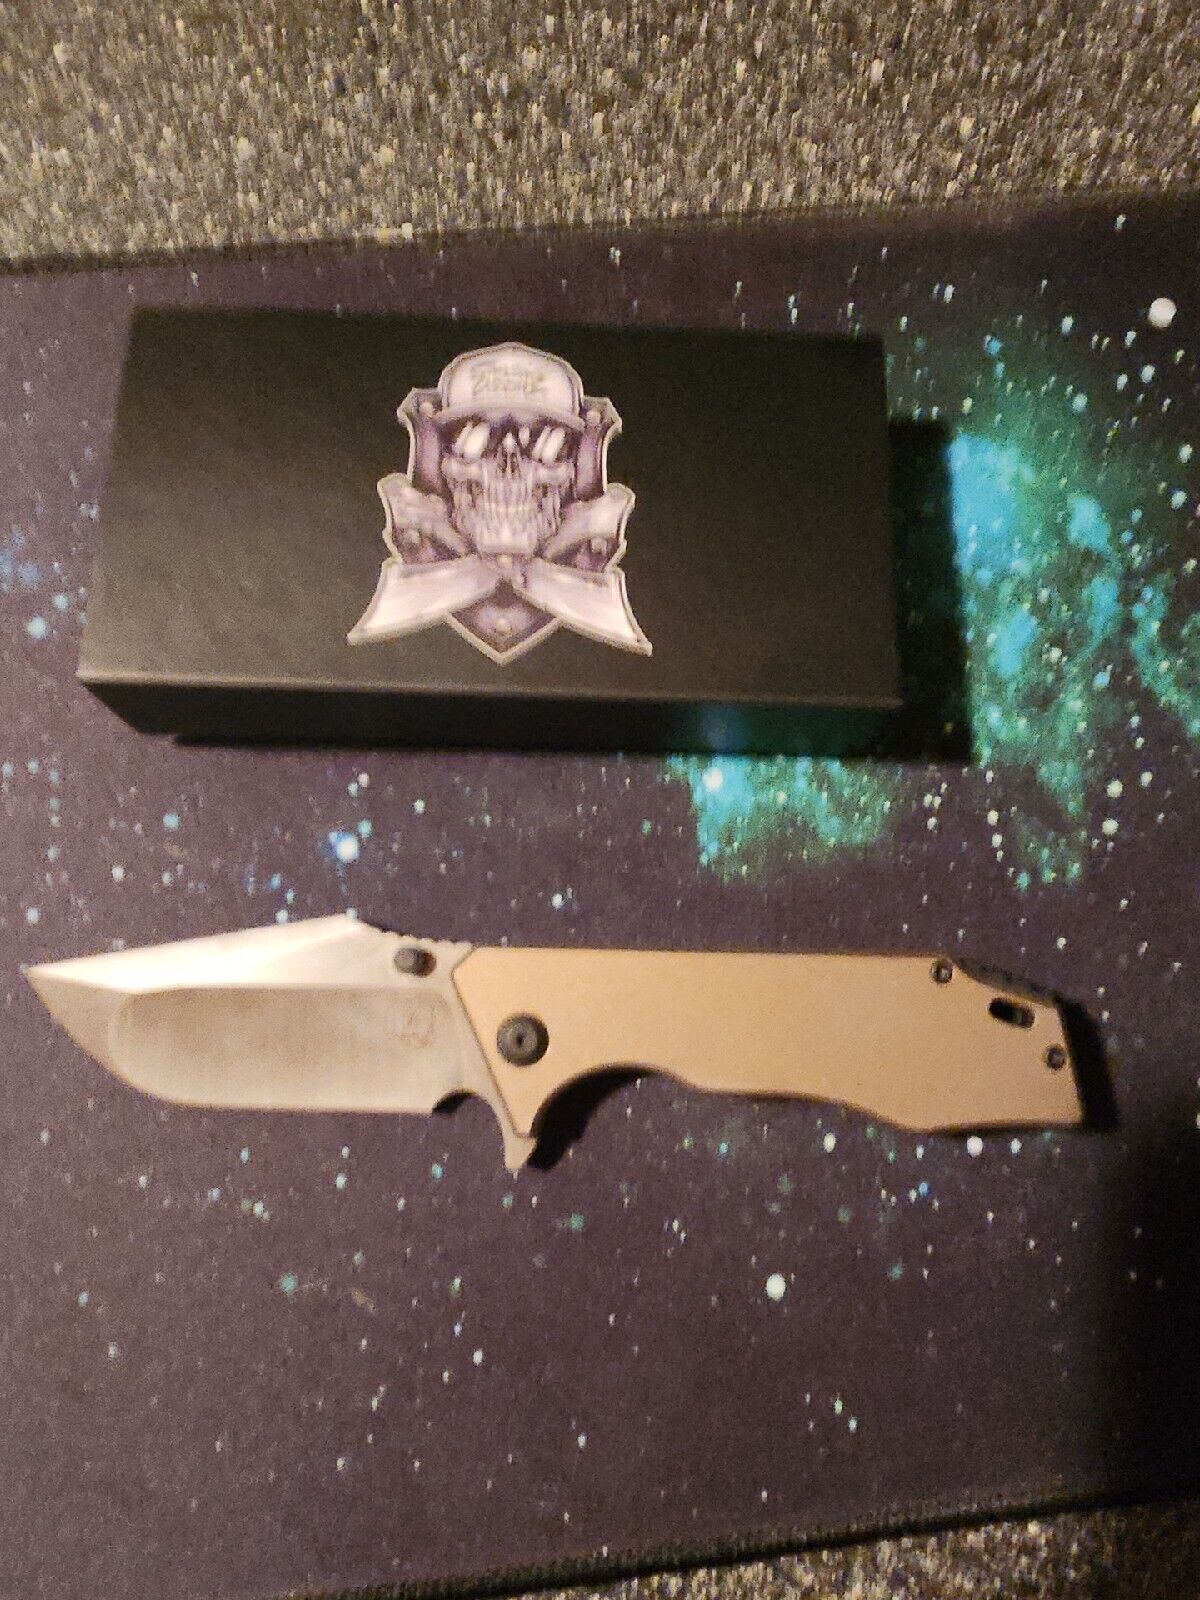 Something obscene company J-cape facebook group final 3.5.  Never cut or carried